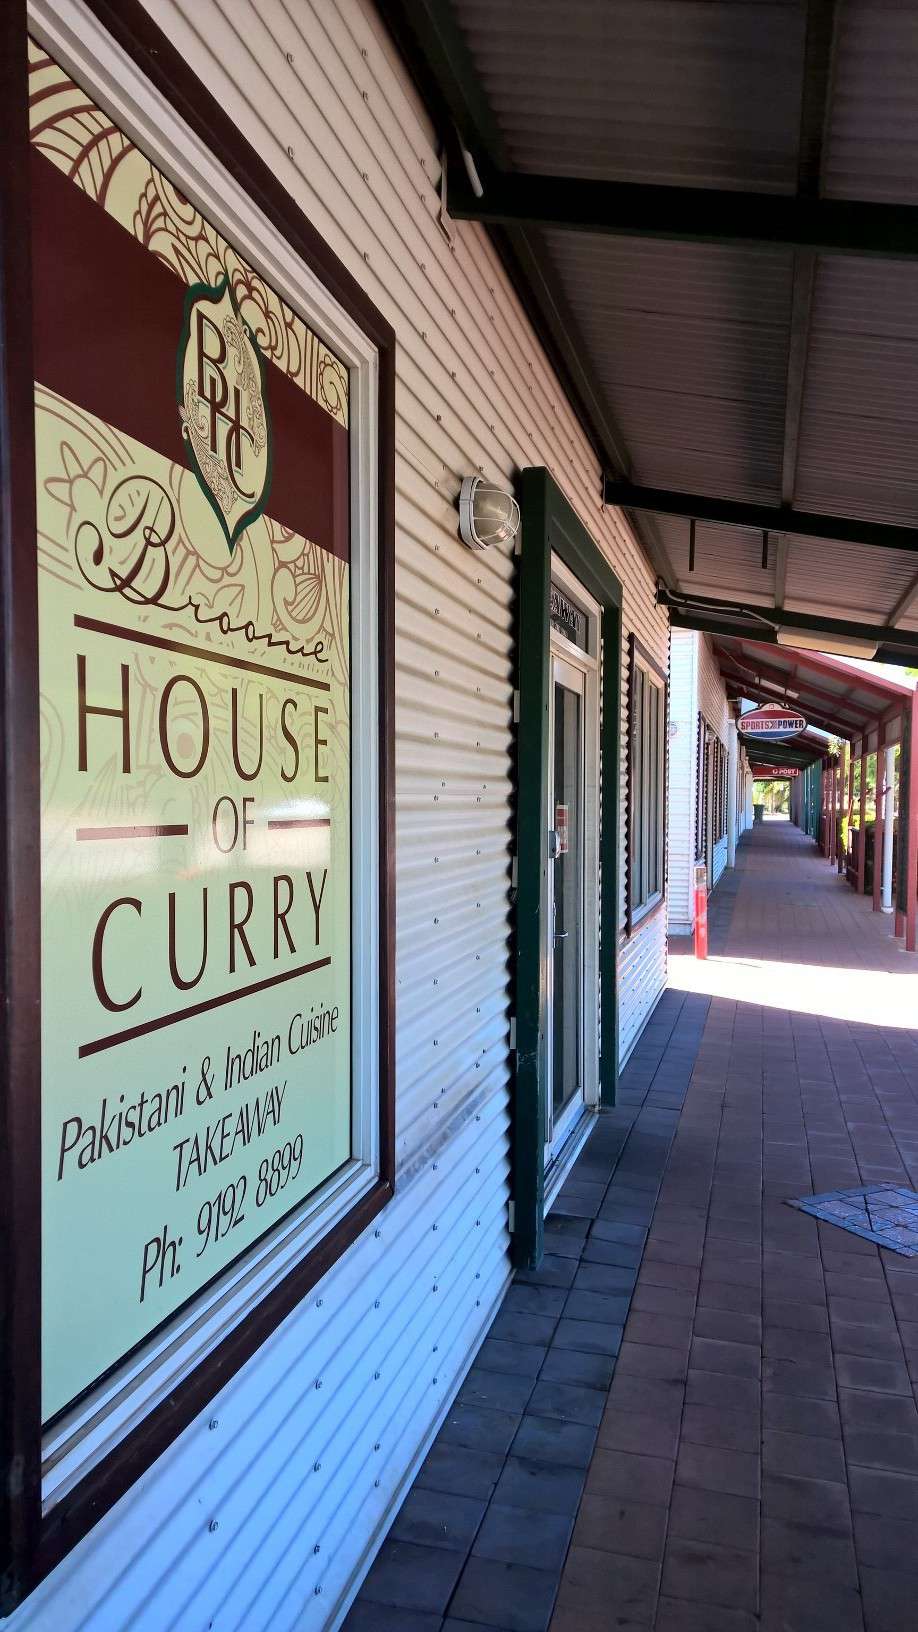 House of Curry